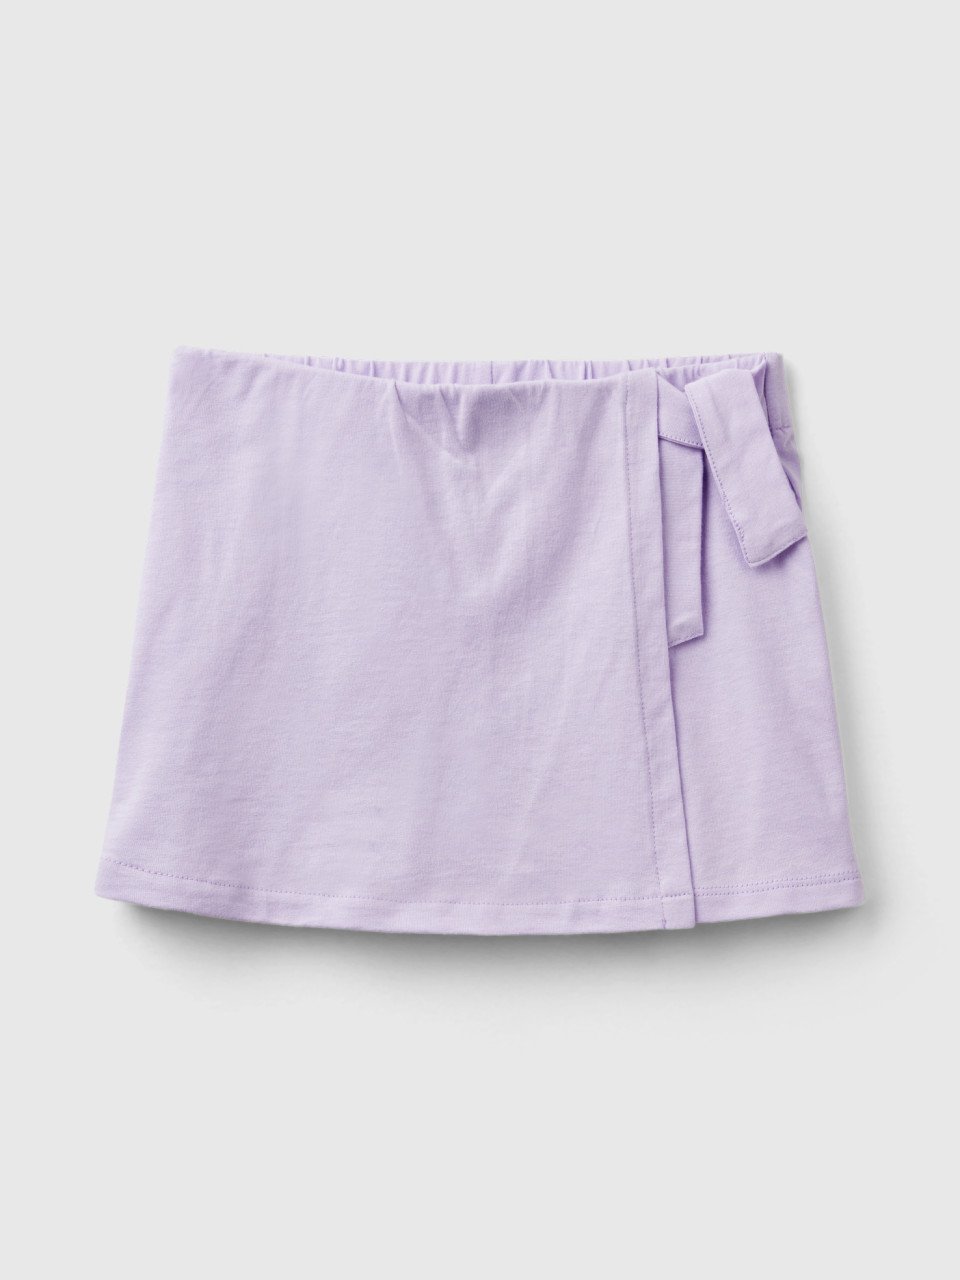 Benetton, Shorts With Panel, Lilac, Kids